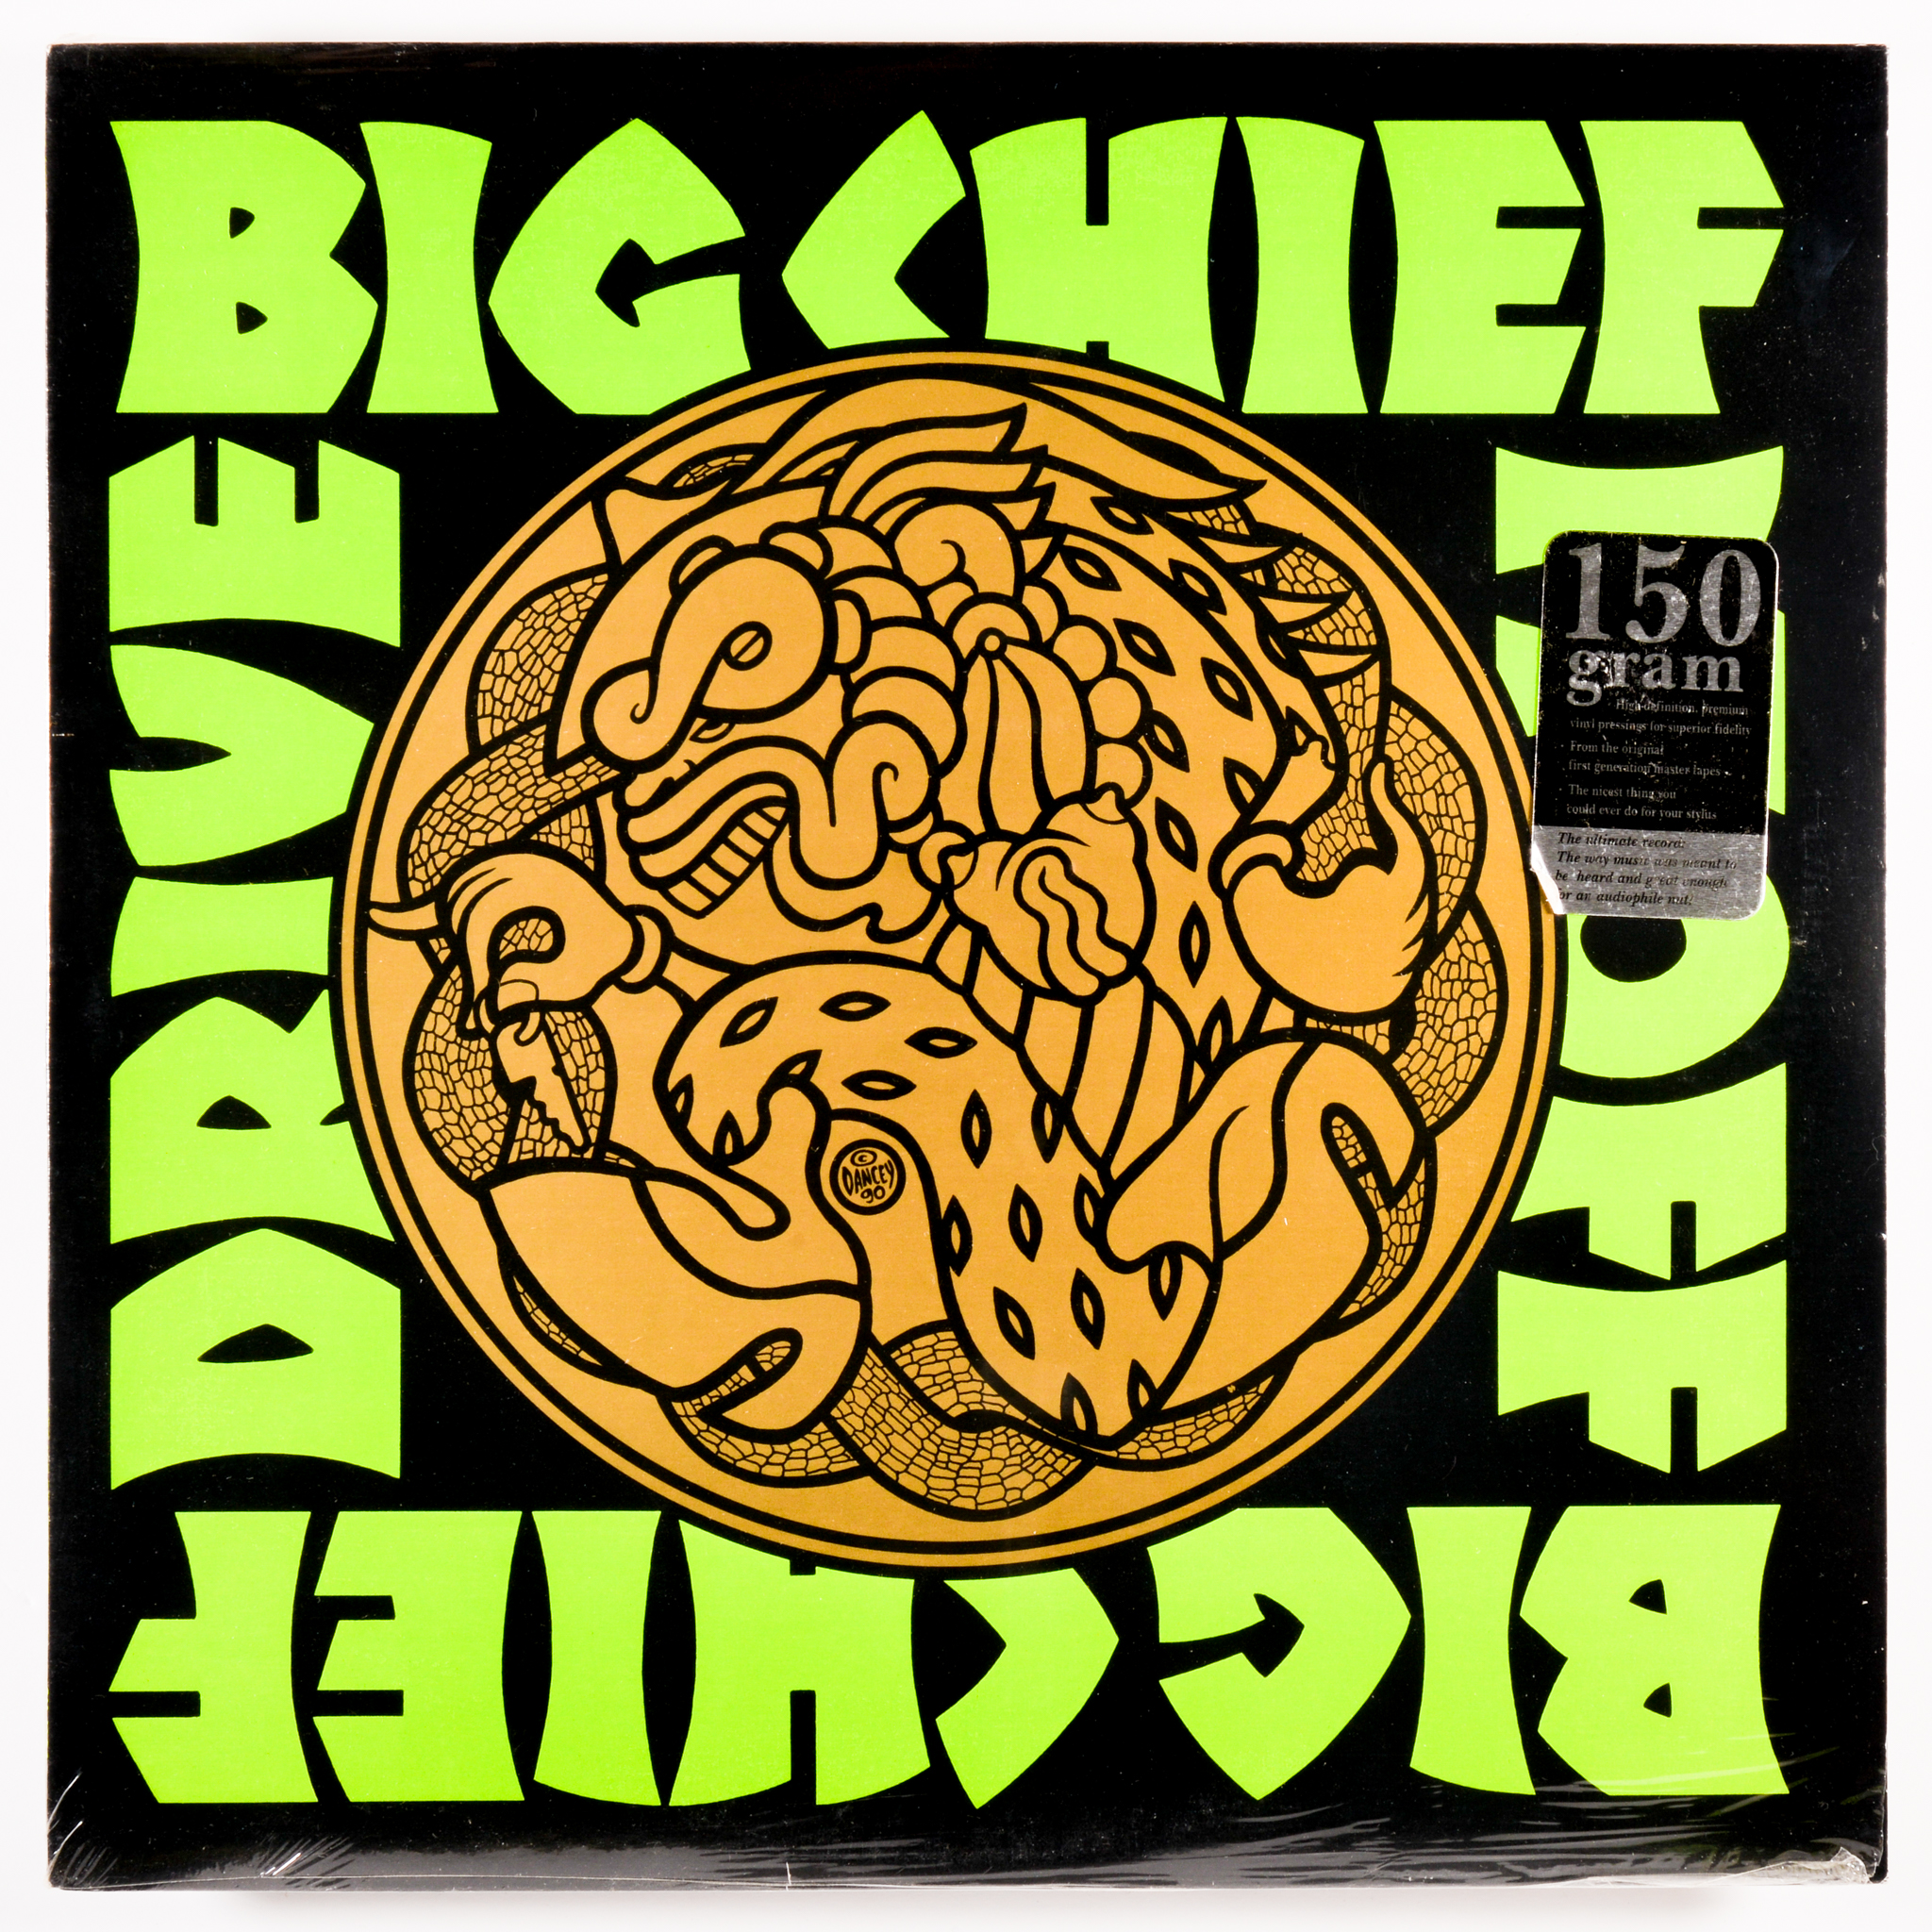 BIG CHIEF – DRIVE IT OFF – Get Hip Recordings!